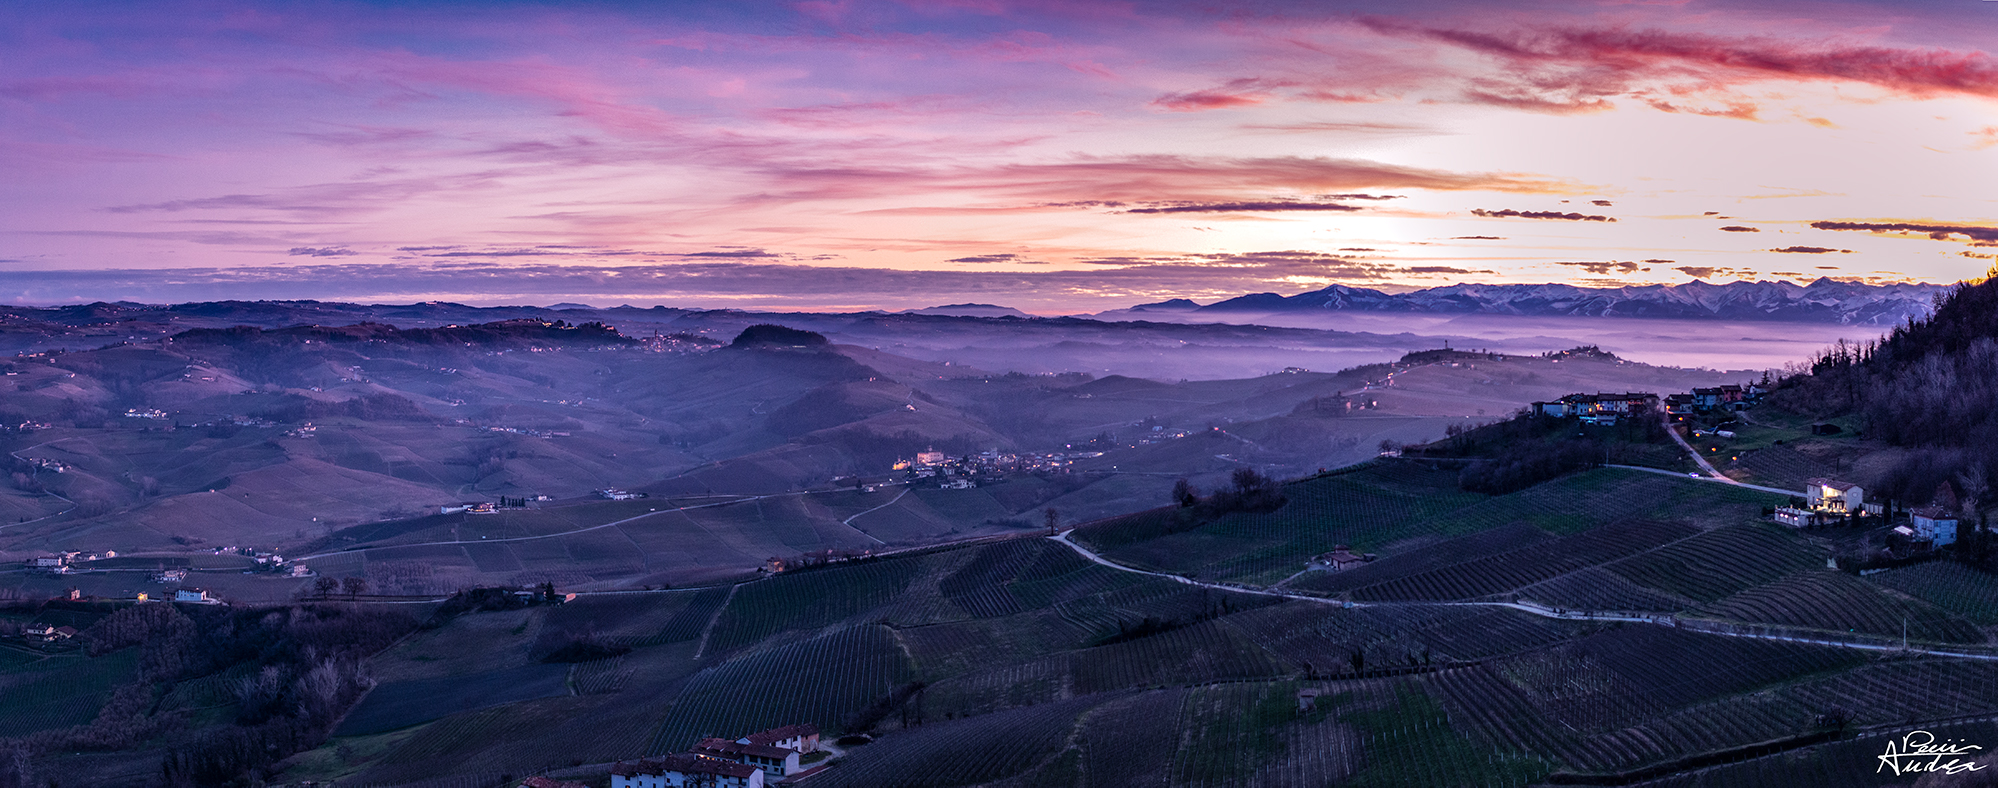 tramonto sulle Langhe...